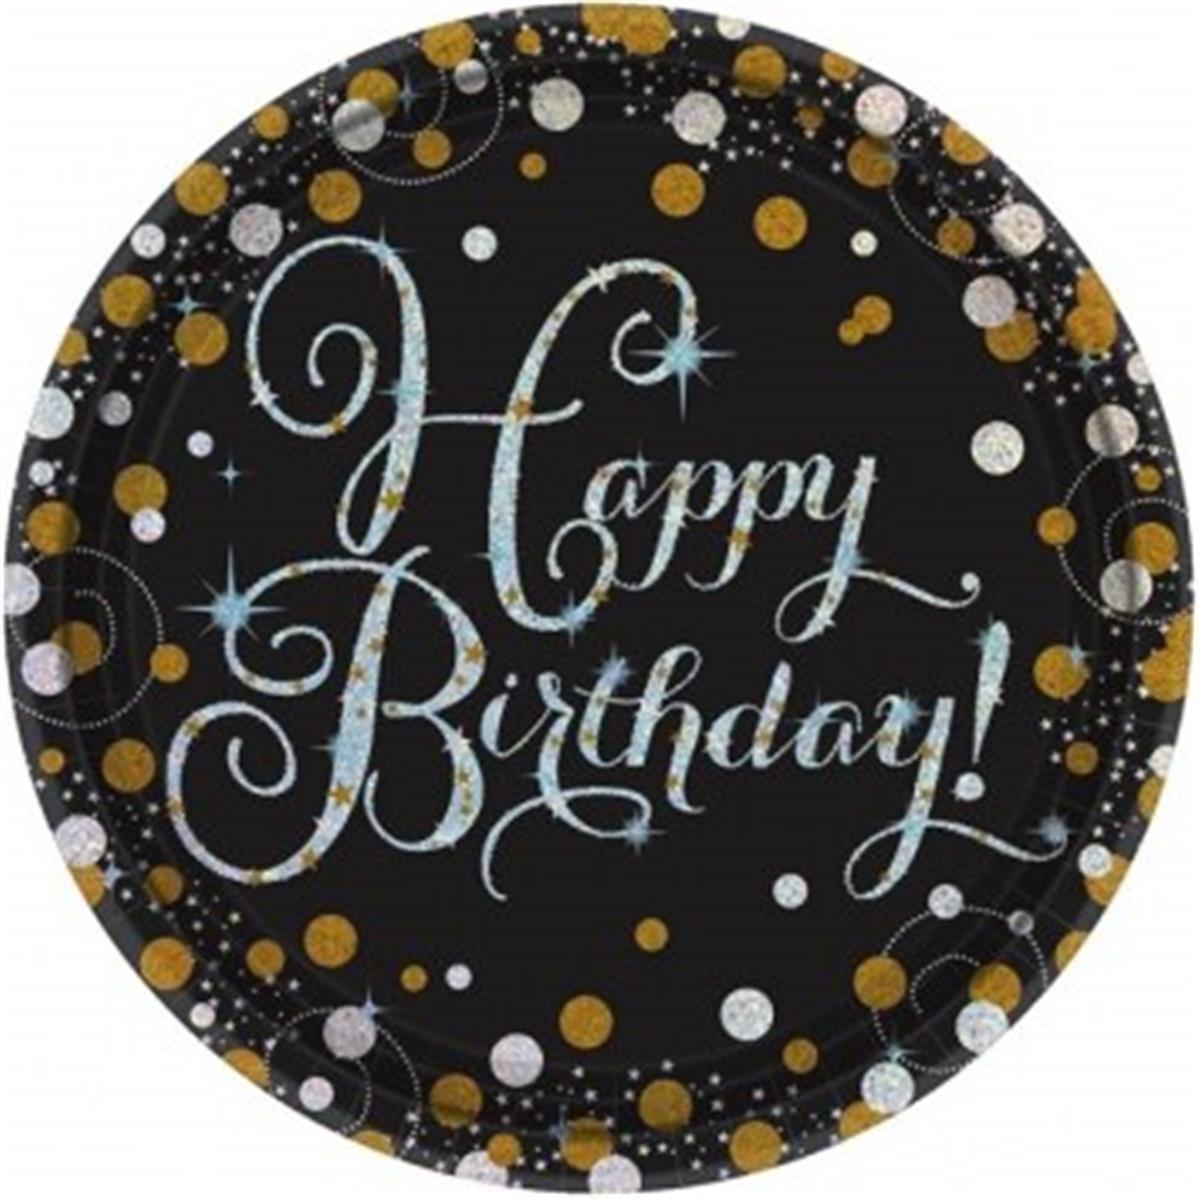 Picture of Amscan 269855 Sparkling Celebration 7 in. Dessert Plates - 8 Piece